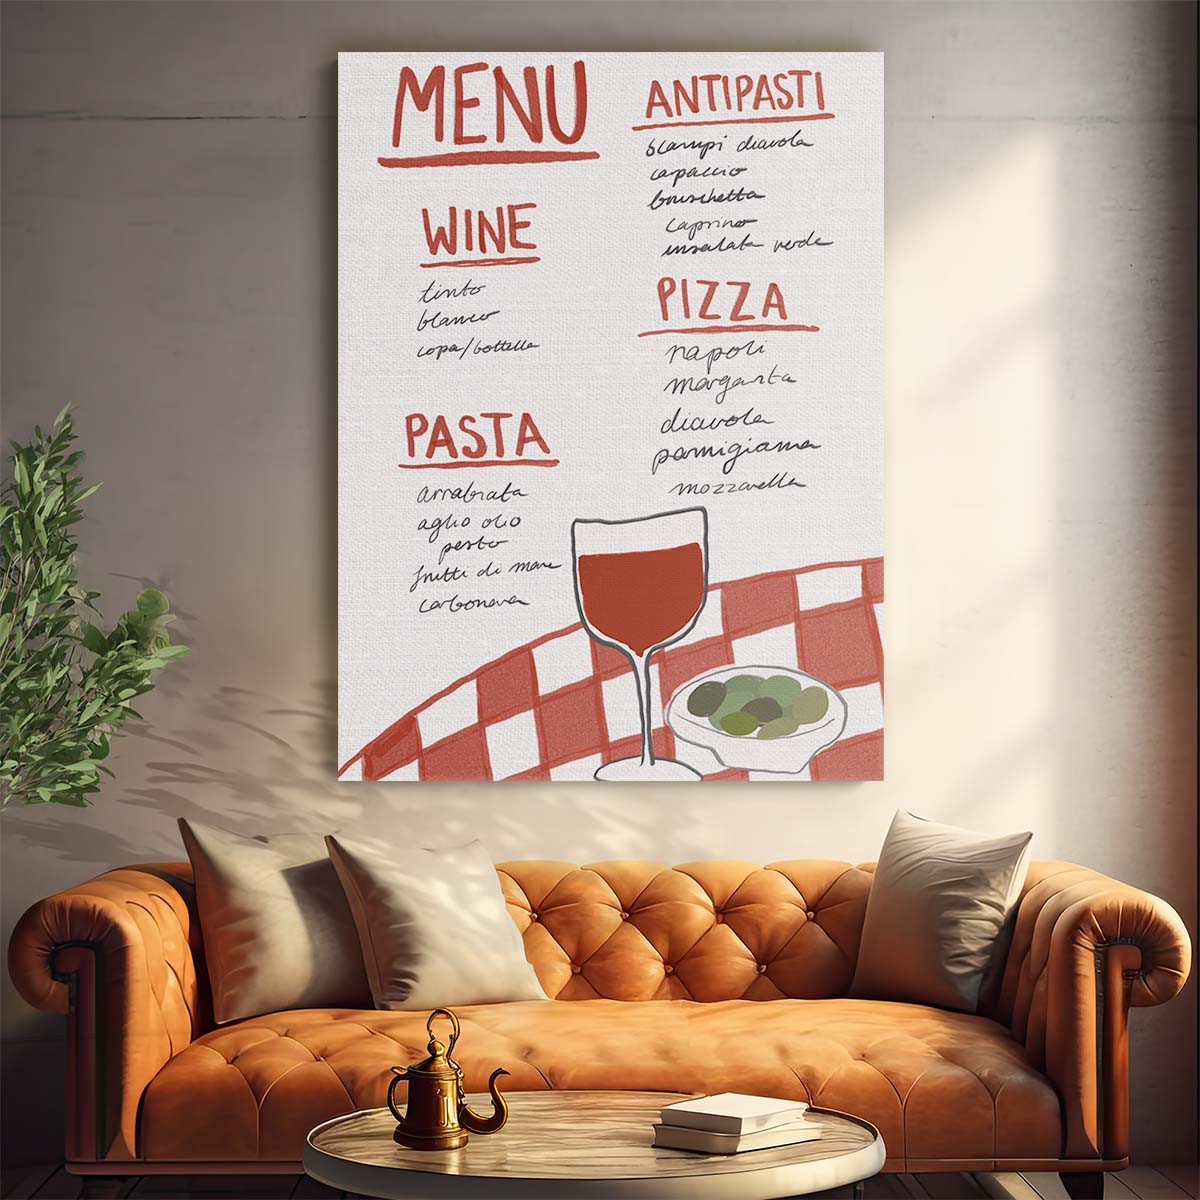 Bright Italian Restaurant Menu Illustration with Wine & Pizza by Luxuriance Designs, made in USA